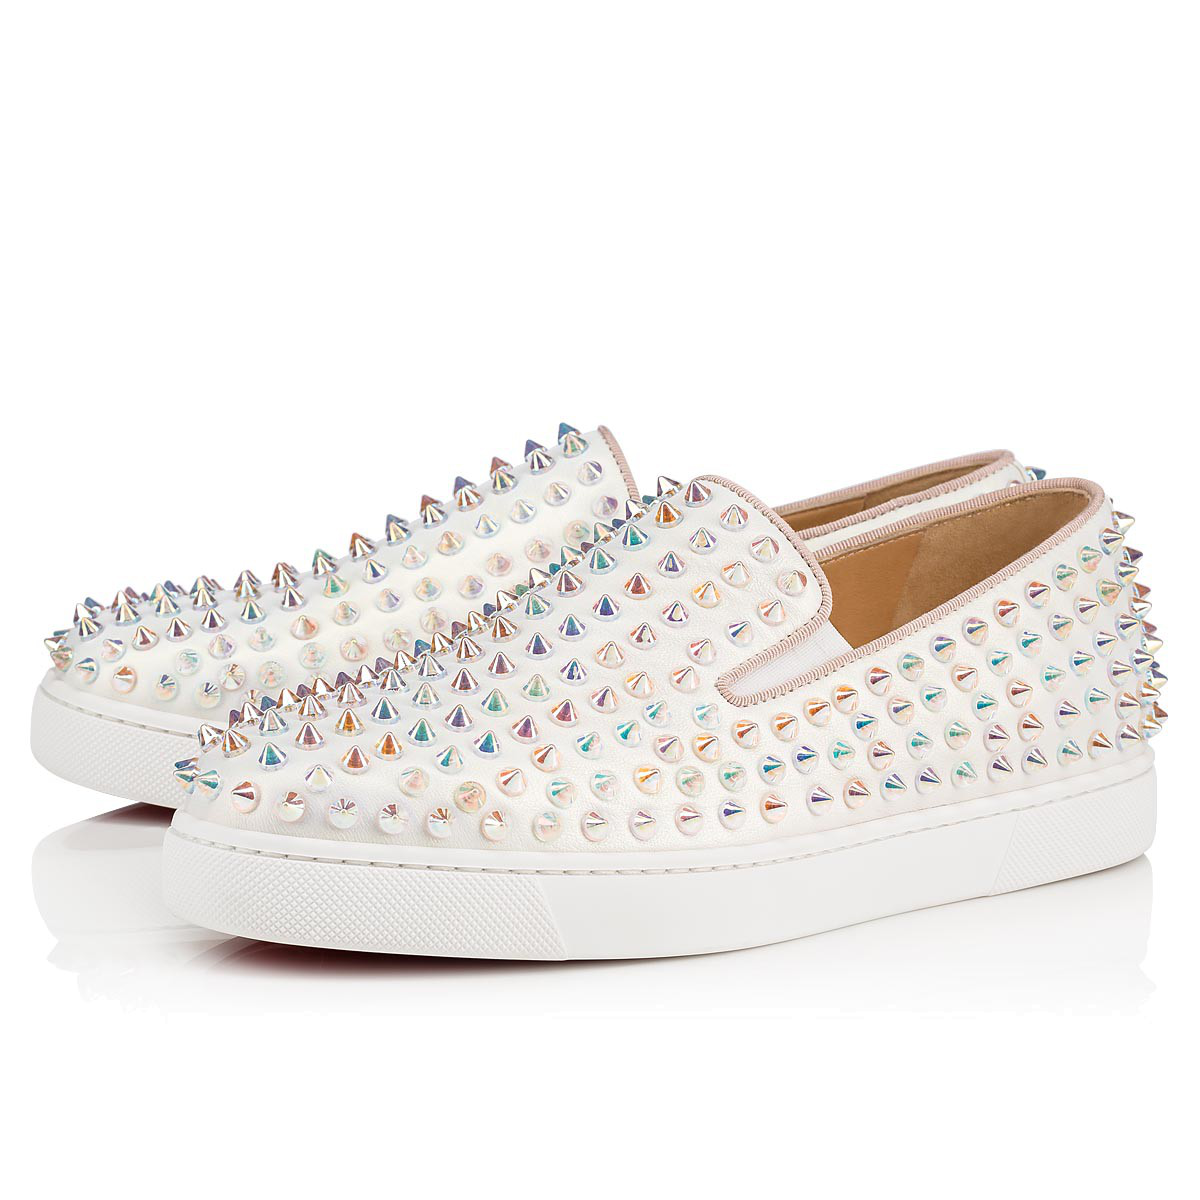 Christian Louboutin Roller Boat Woman In Snow/clear Ab | ModeSens